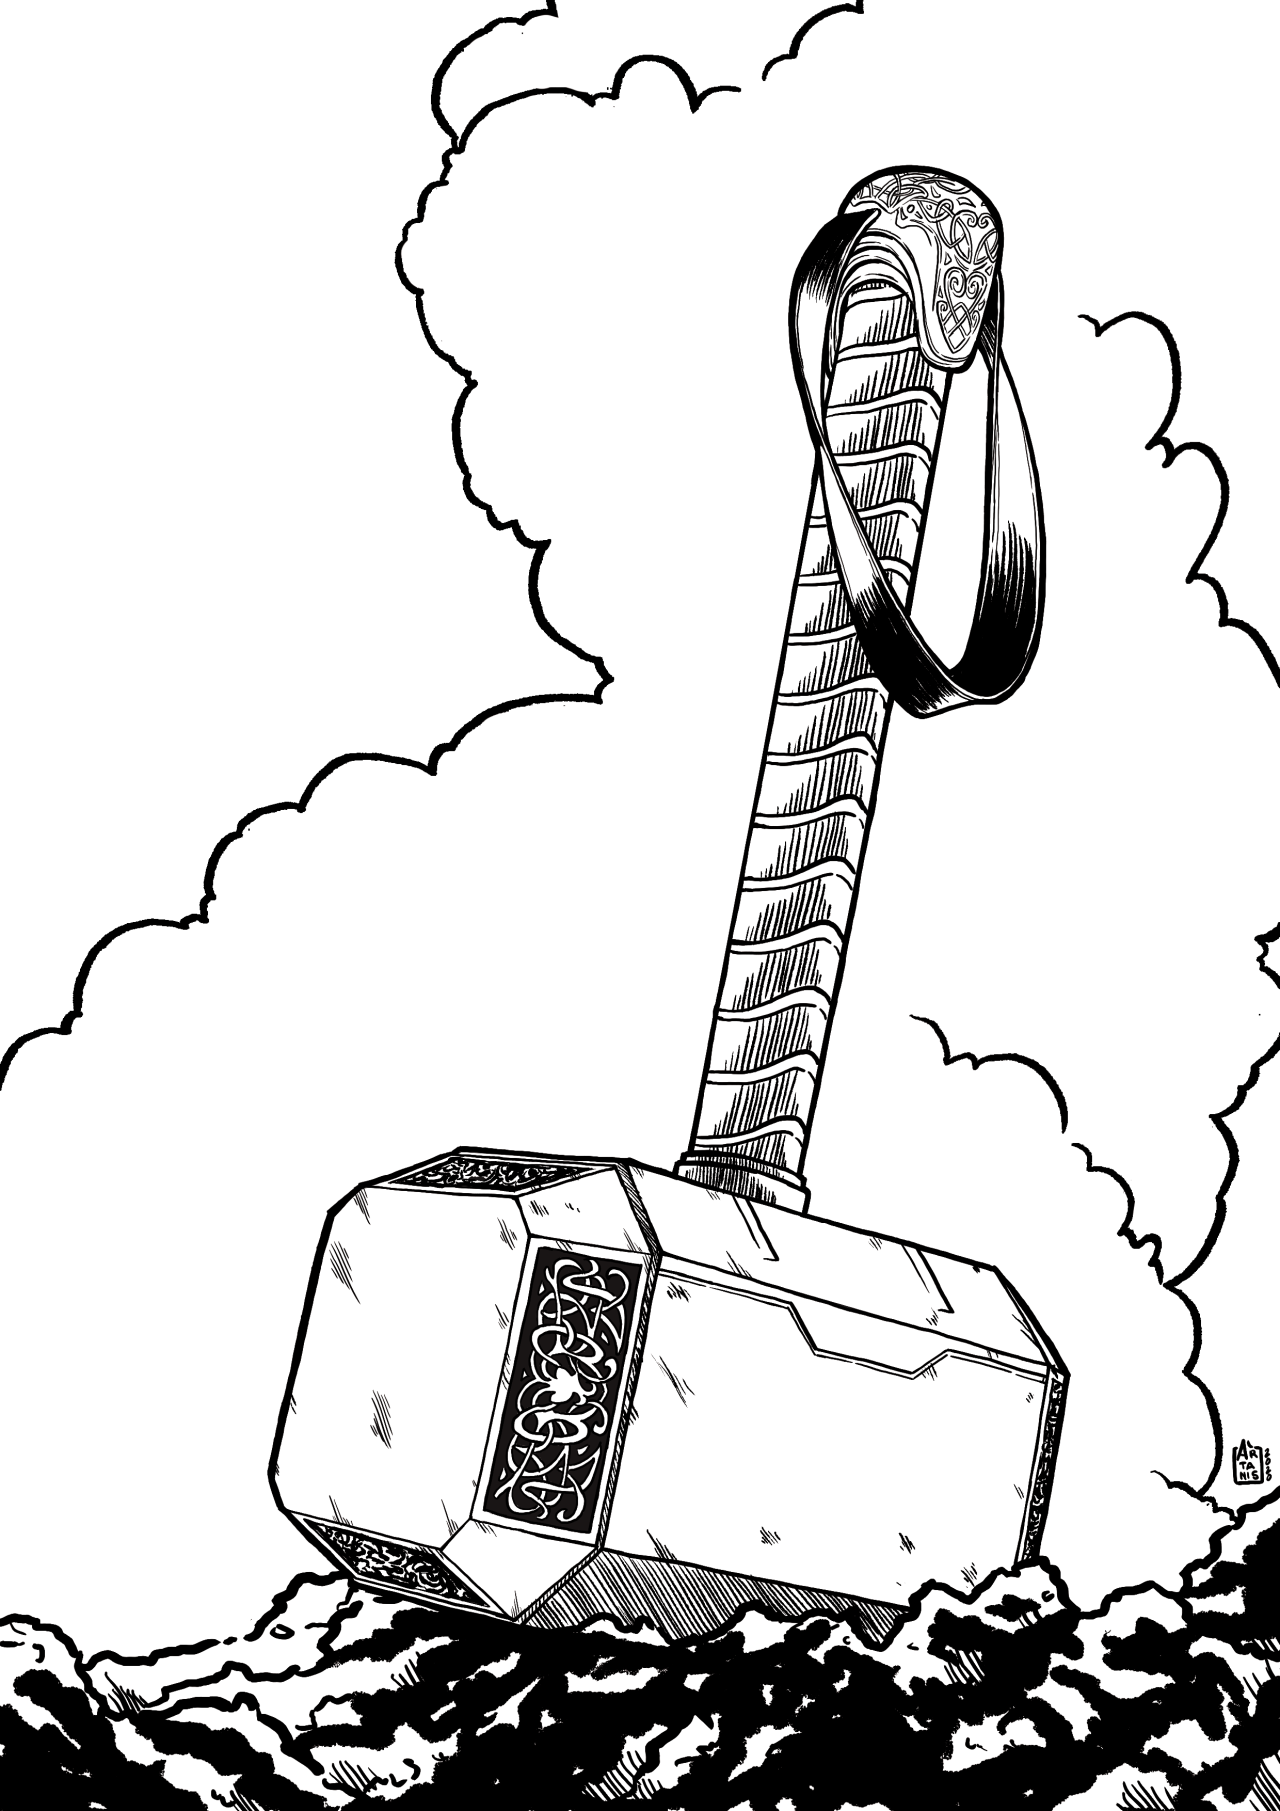 Buy Mjolnir Digital Reference Drawing for Prop Making Online in India - Etsy